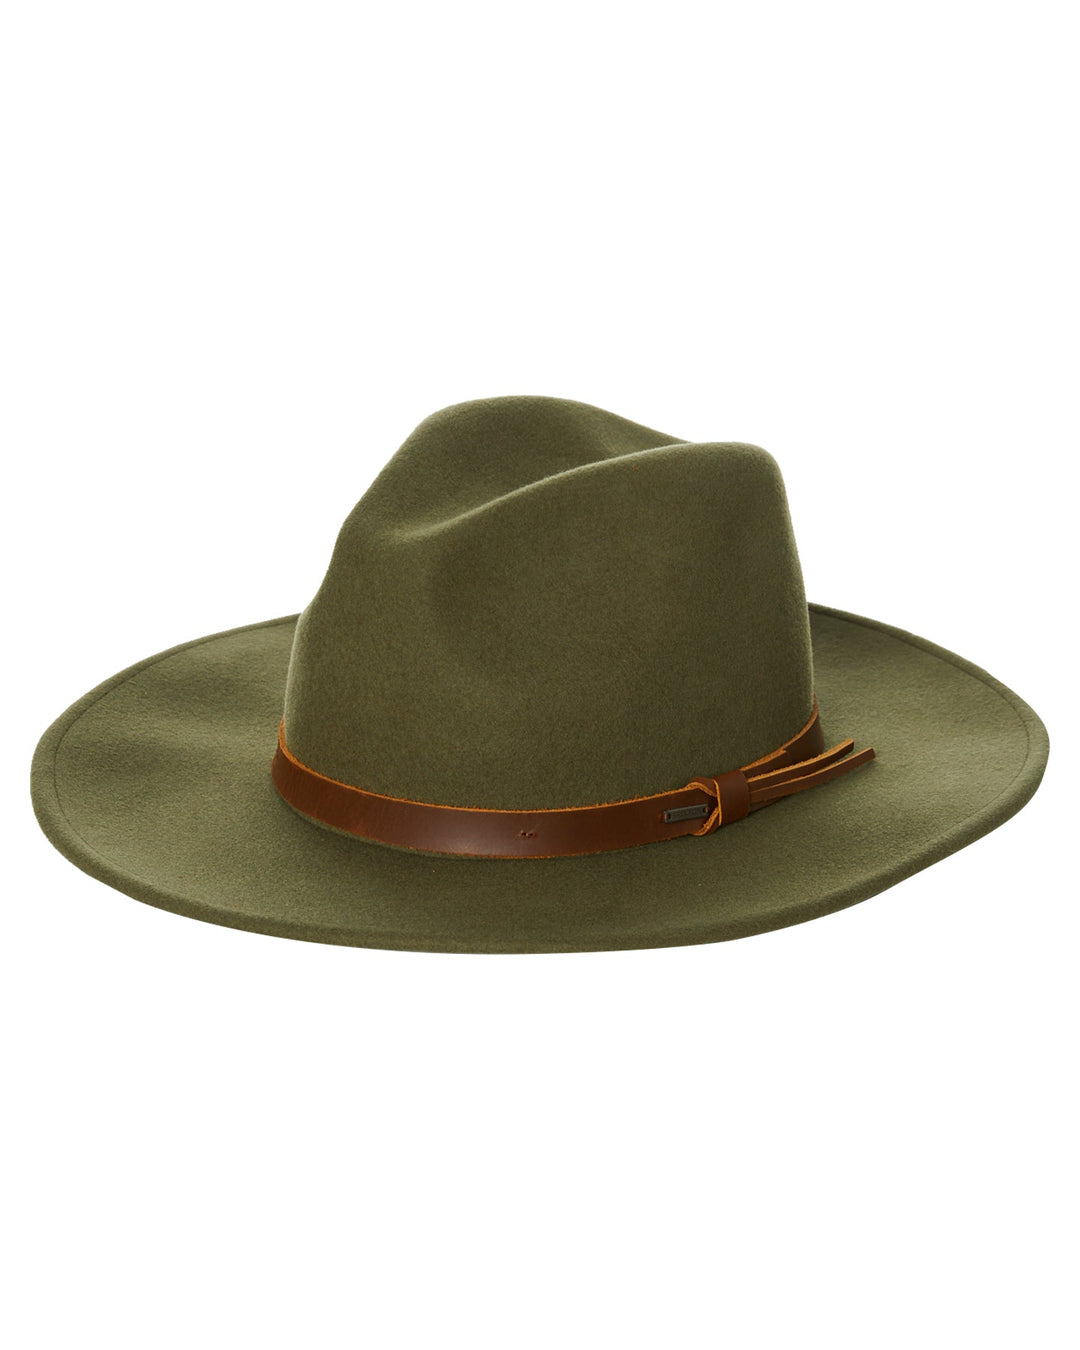 Field Proper Hat - Military Olive - Chillis & More NZ